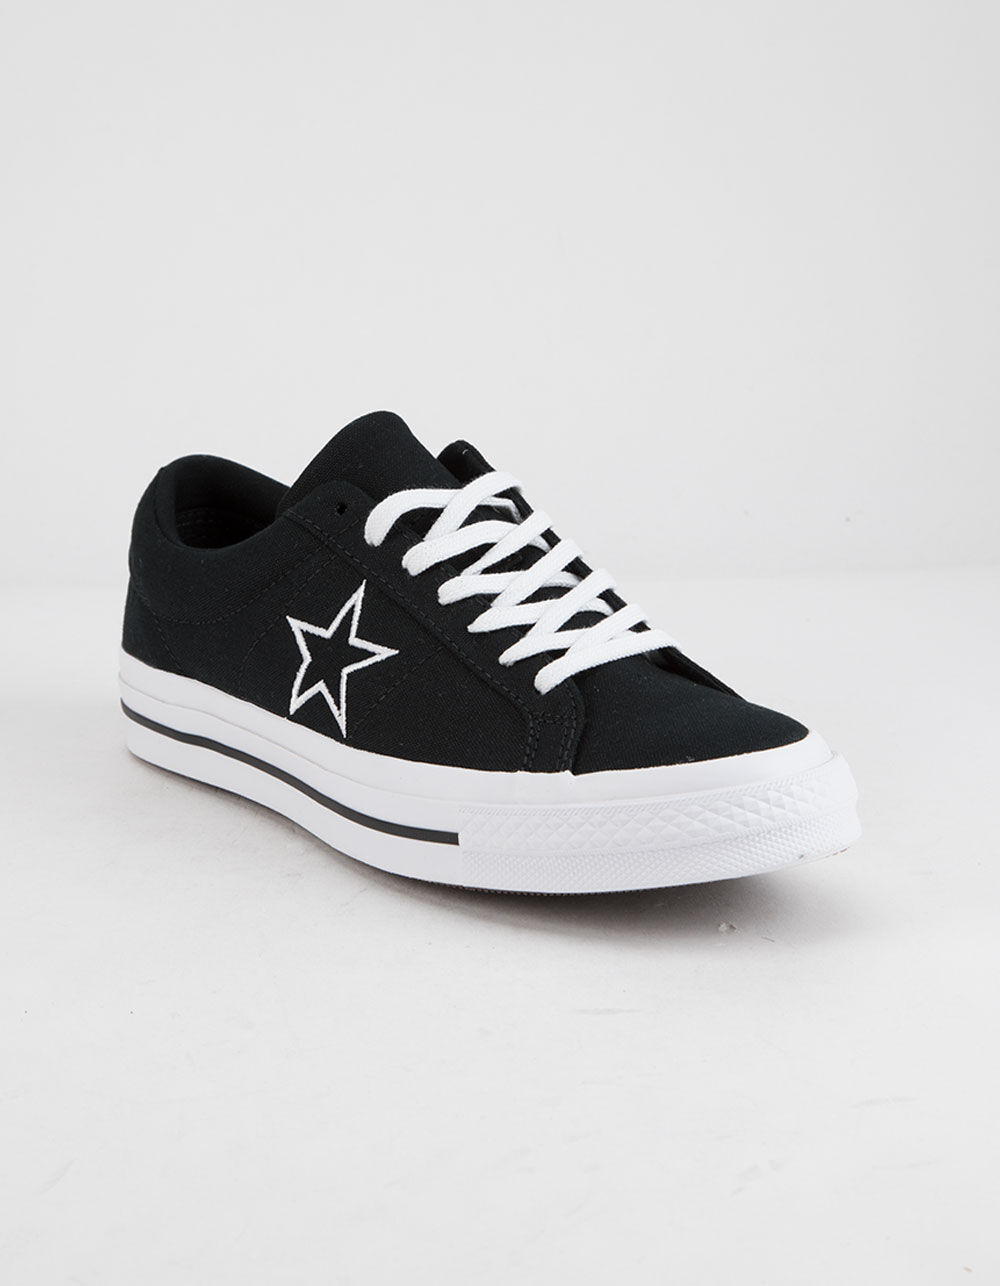 CONVERSE One Star Ox Black & White Low Top Shoes image number 1